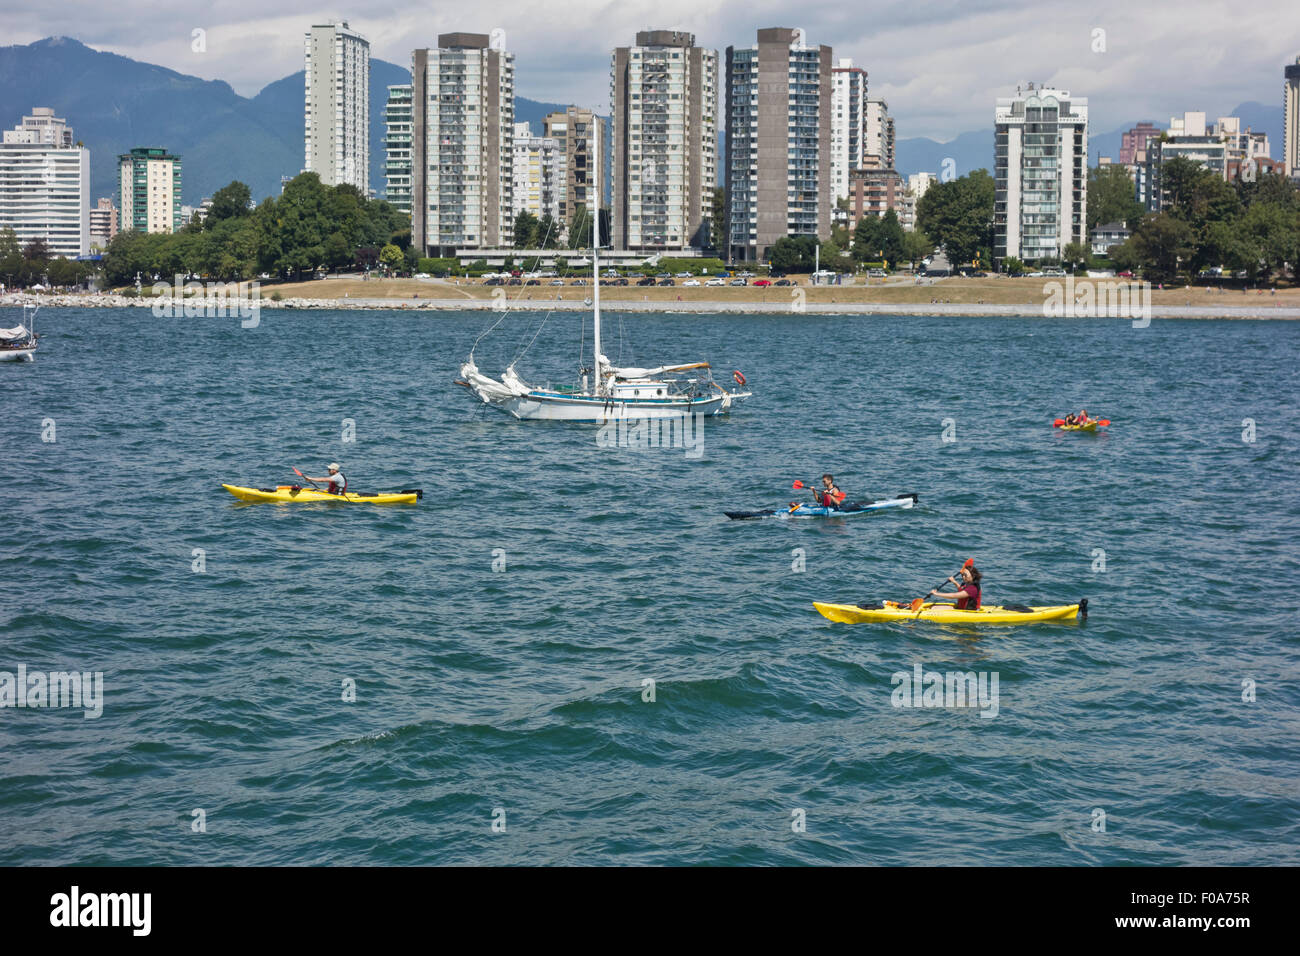 Several people in kayaks on the waters of False Creek in Vancouver, BC, Canada.  City buildings and Sunset Beach in the distance Stock Photo